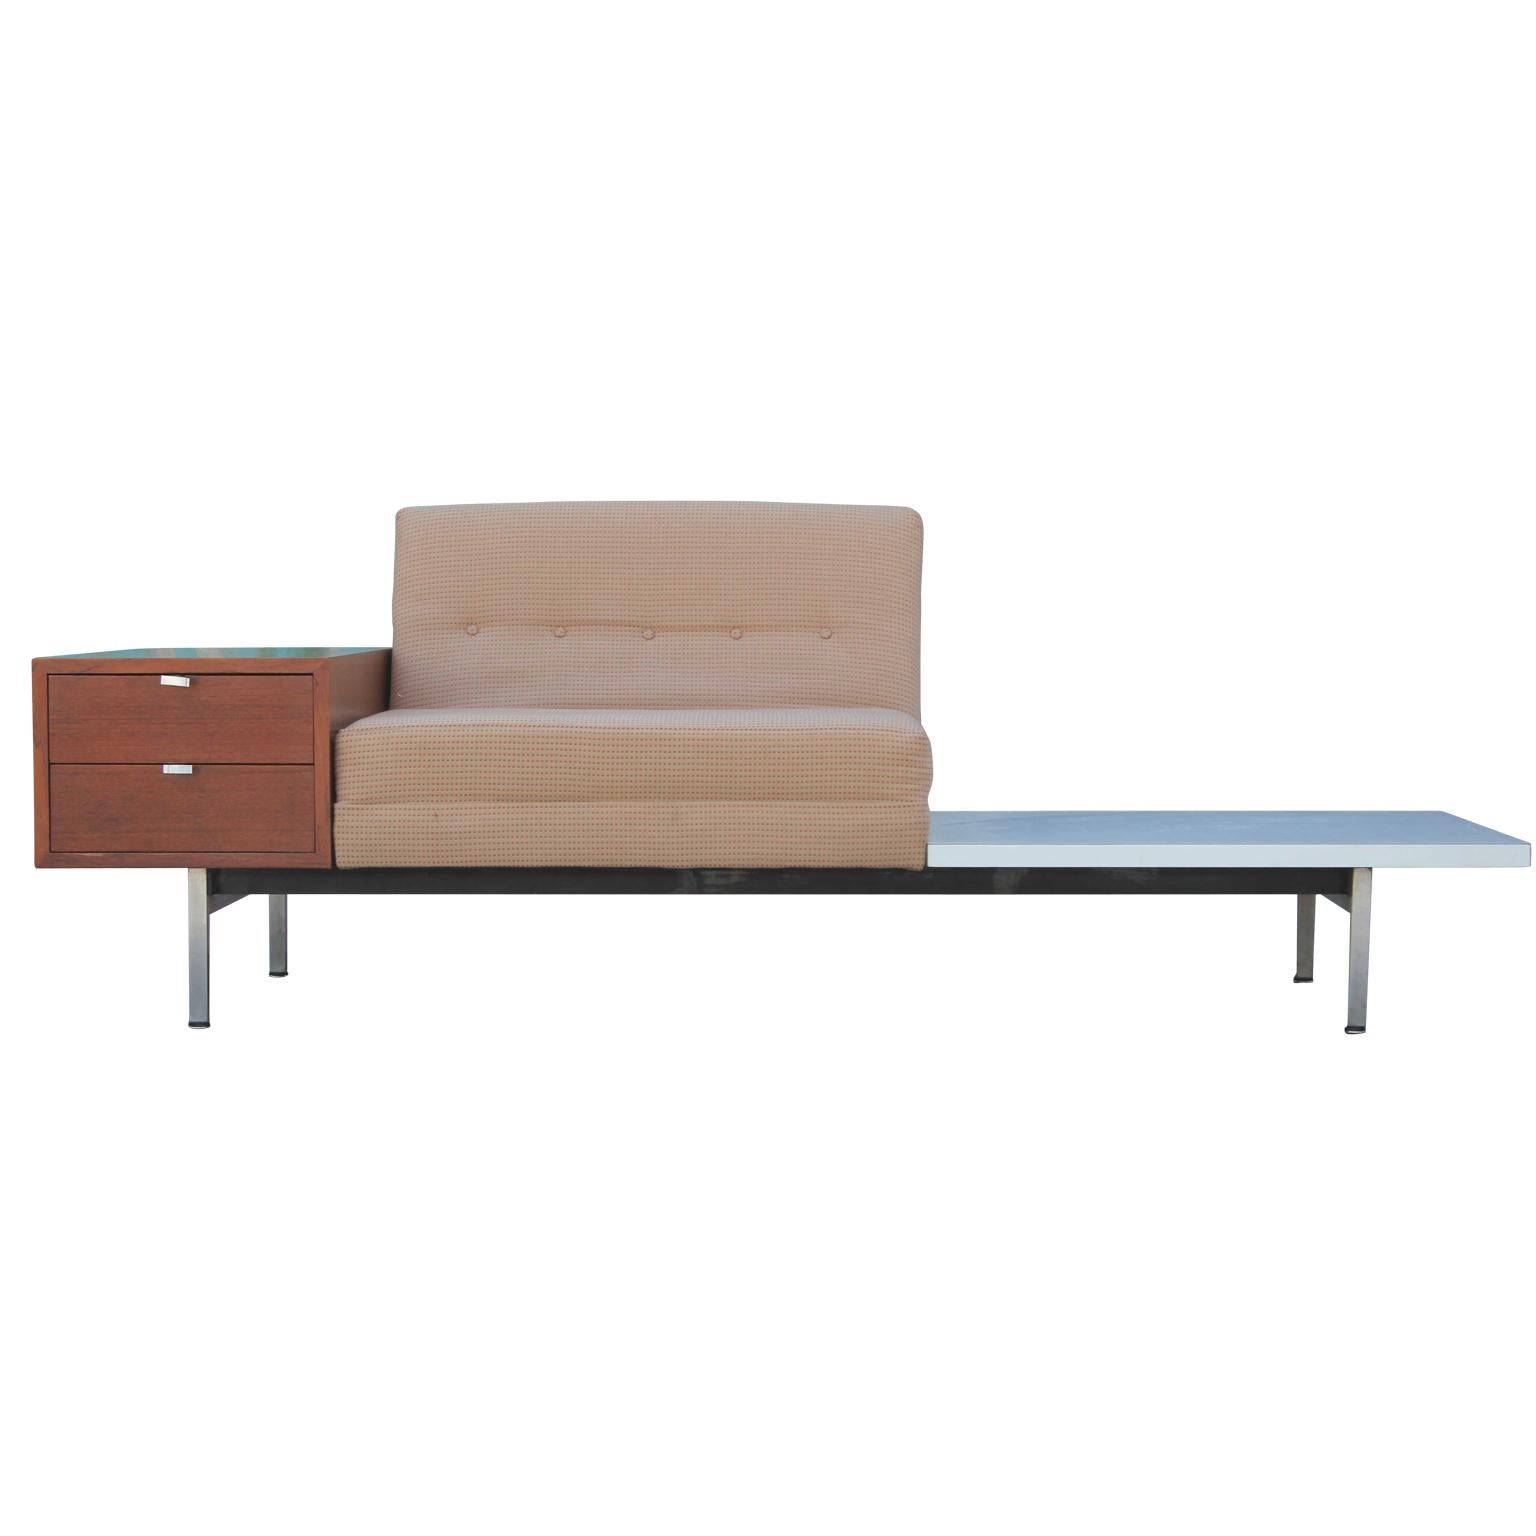 Lovely sofa by George Nelson for Herman Miller as part of their Modular Group line featuring an attached white side table and two walnut drawers. Fun and functional addition to any space.